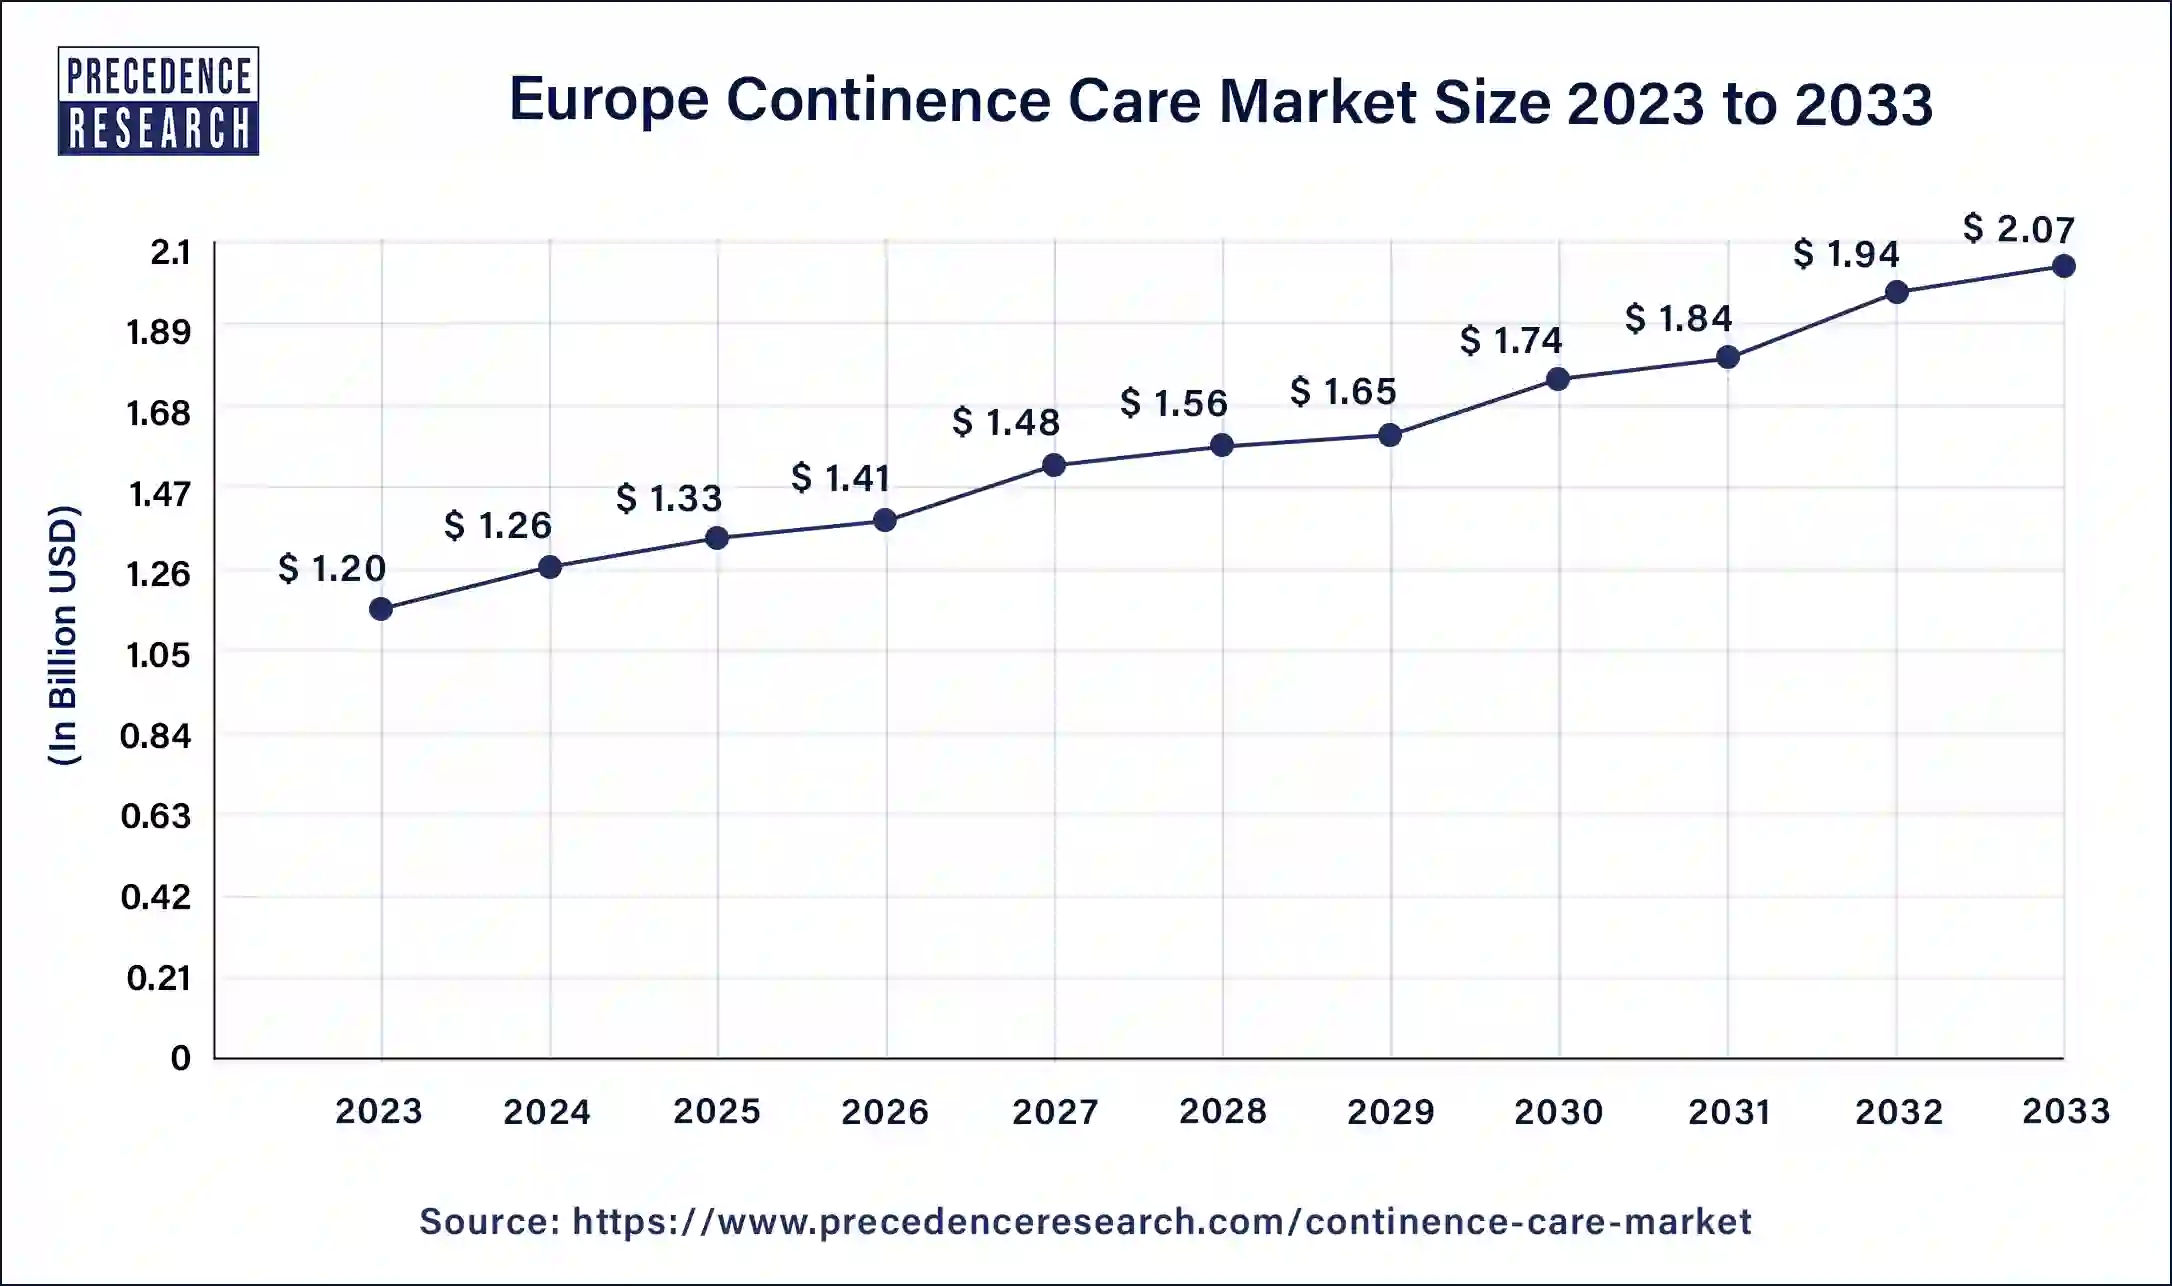 Europe Continence Care Market Size 2024 to 2033